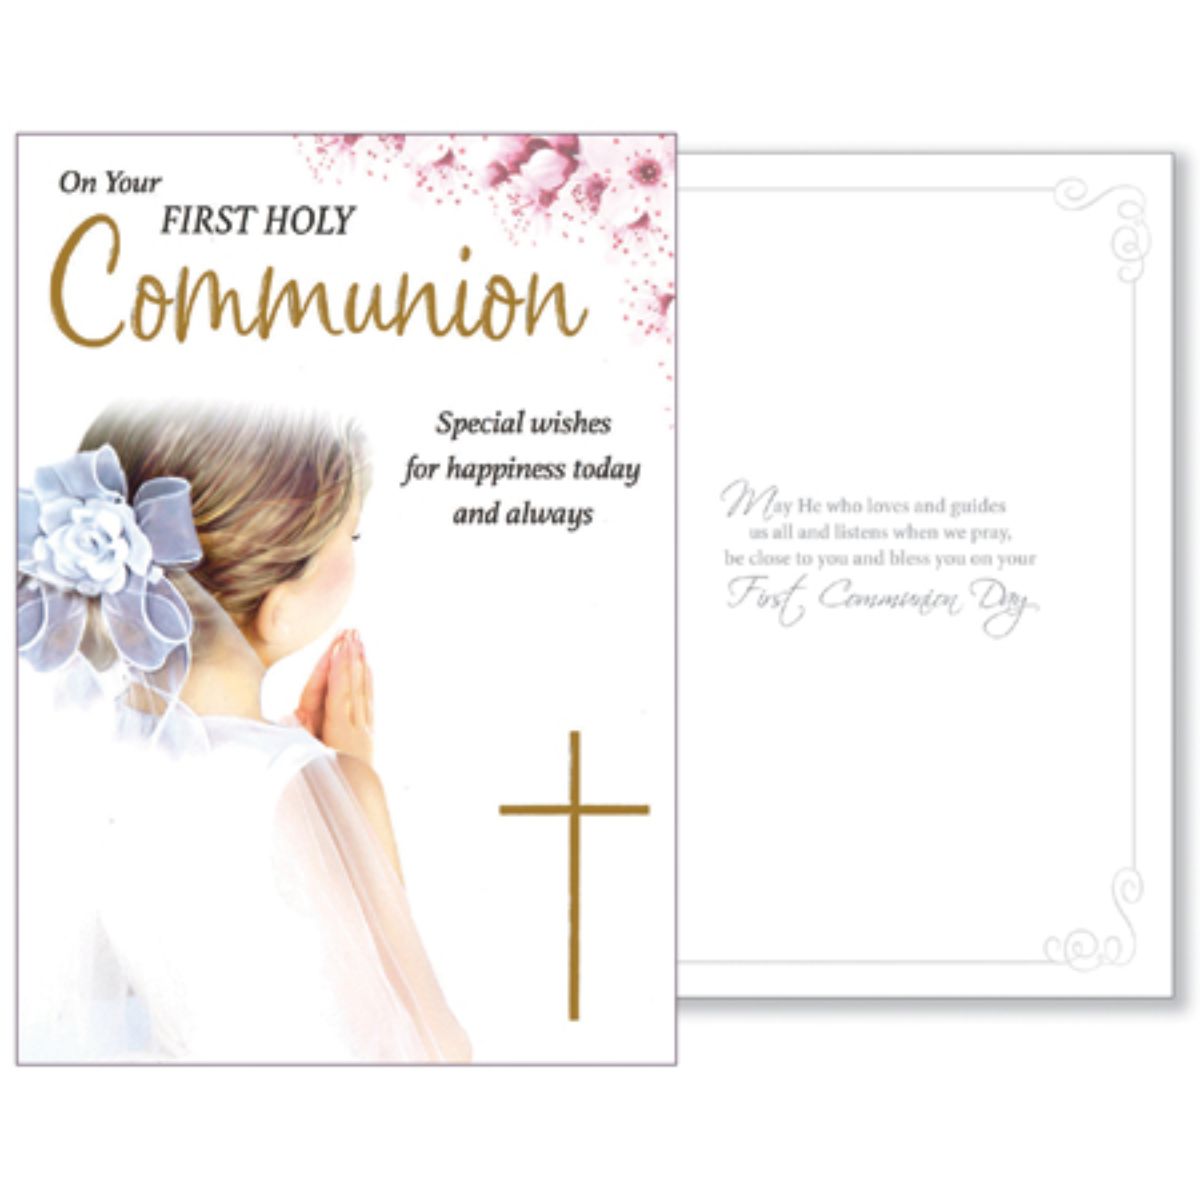 on-your-first-holy-communion-special-wishes-greetings-card-for-a-girl-with-prayer-insert